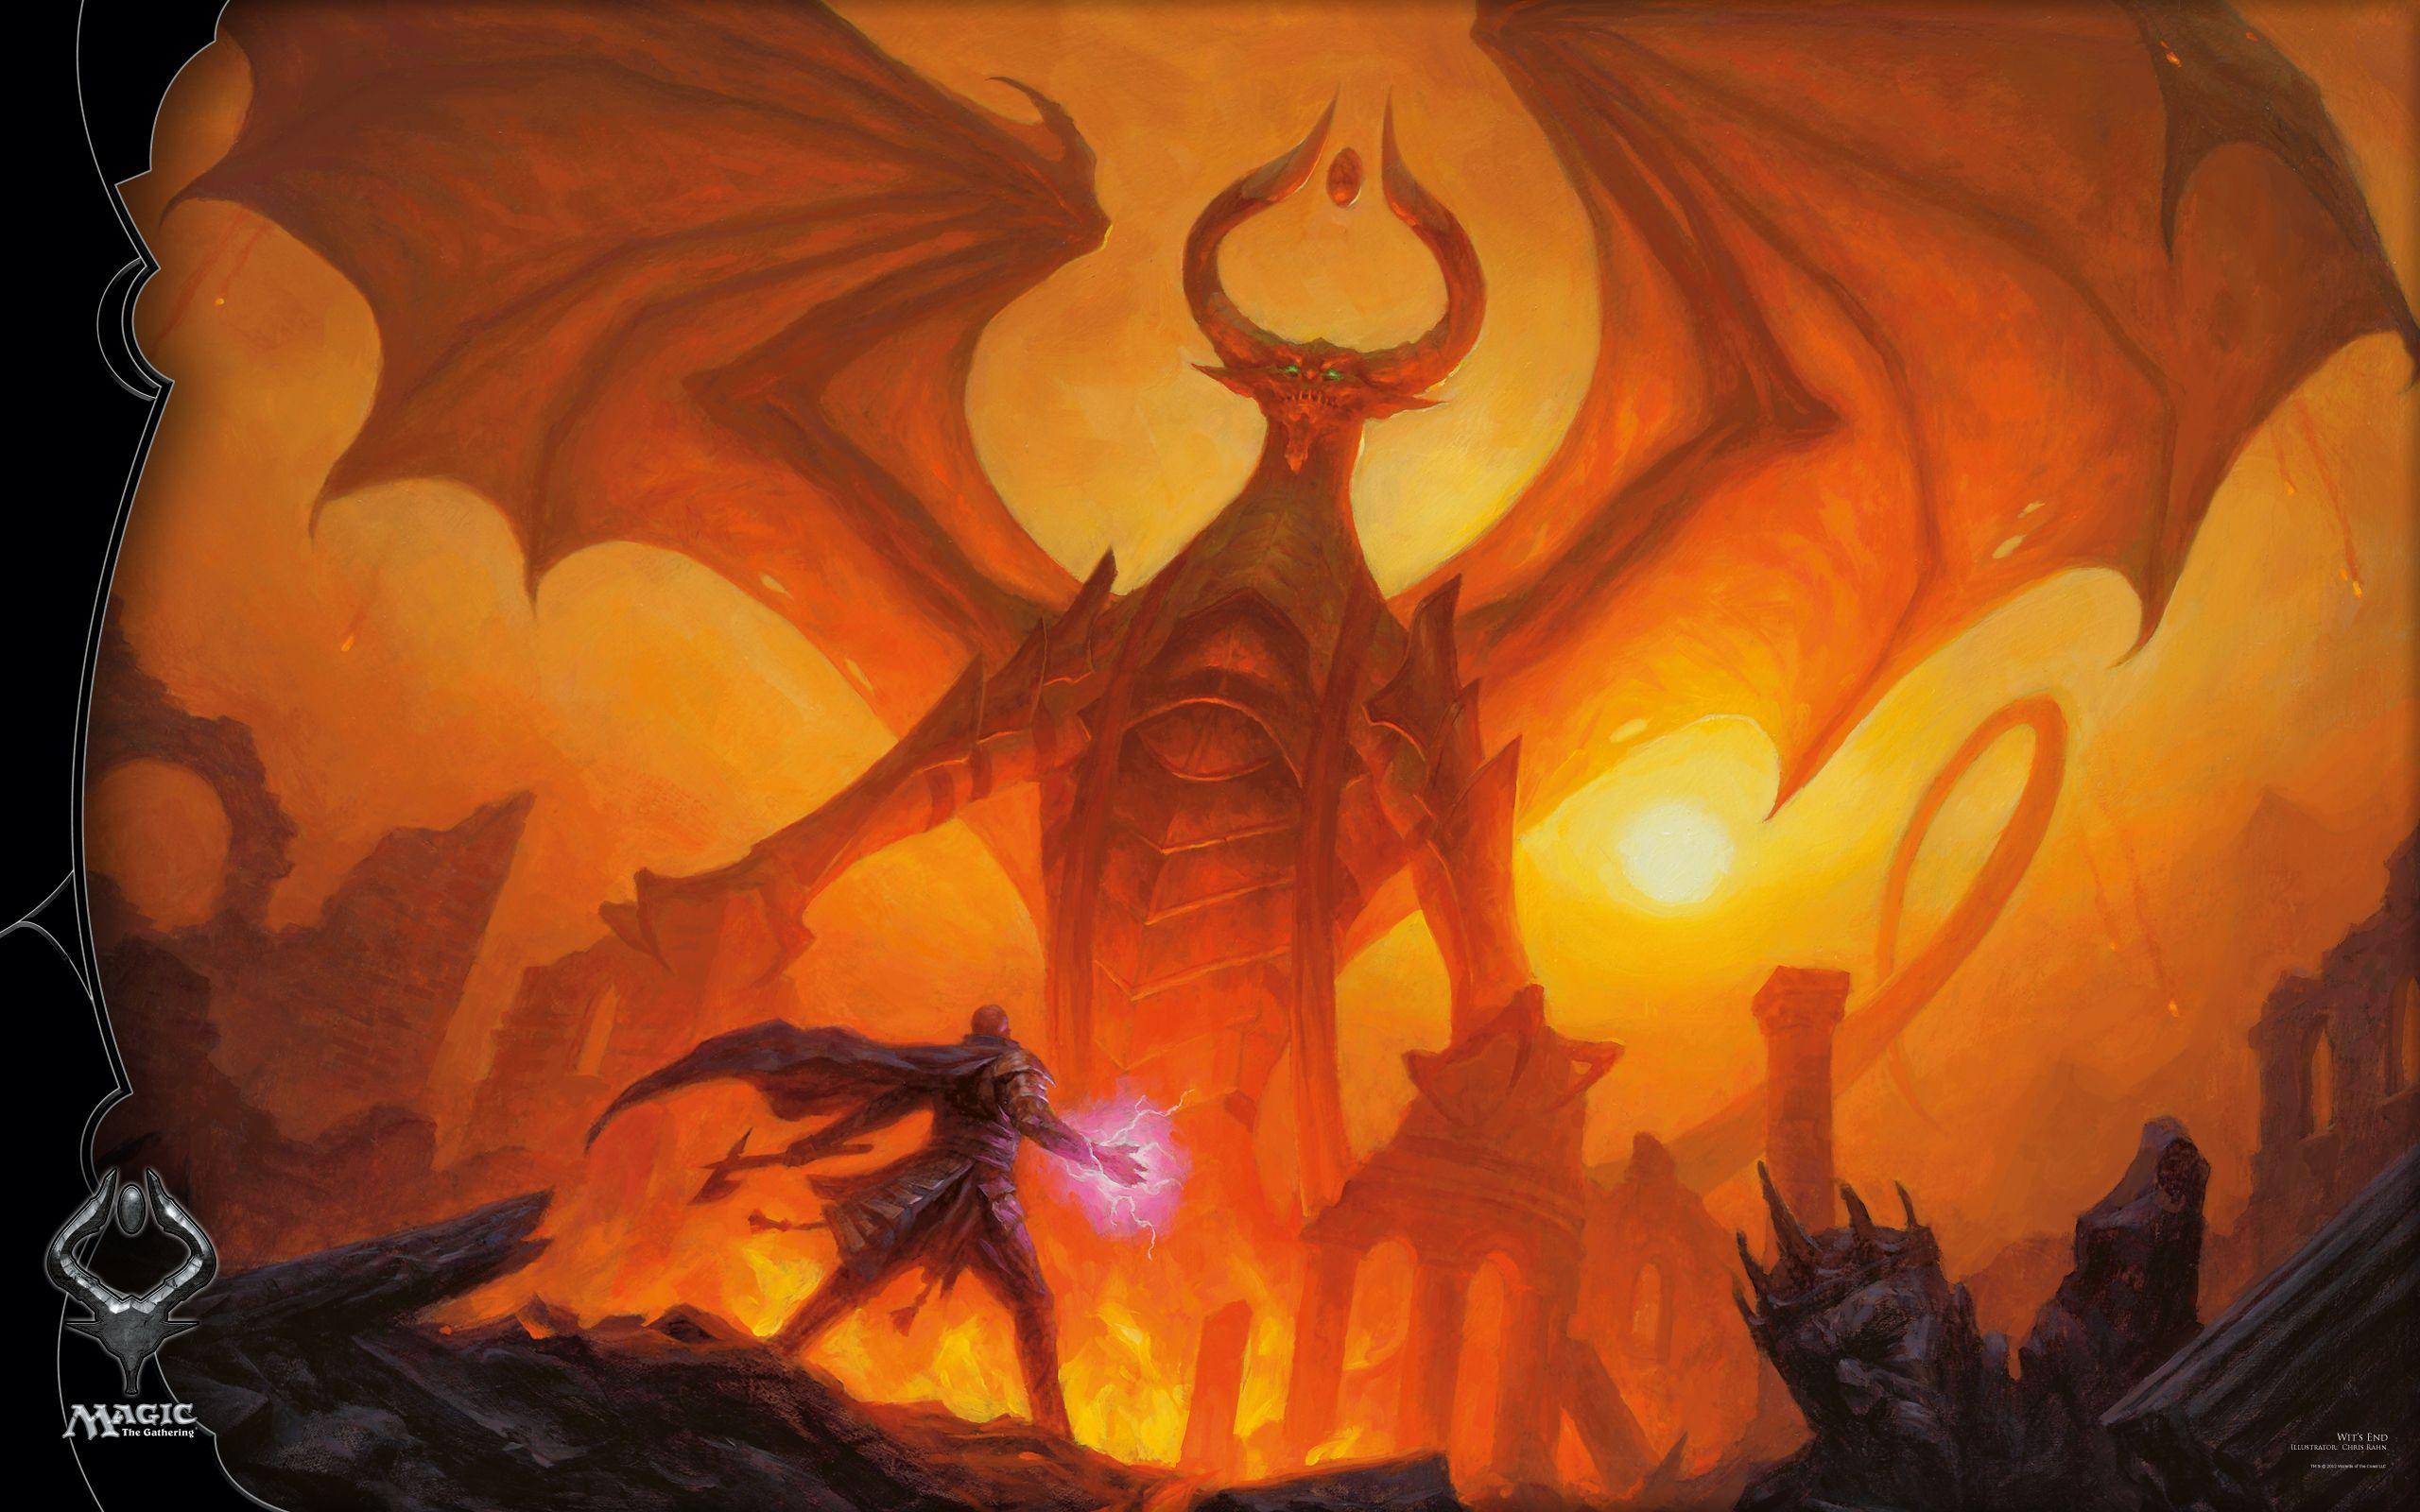 Say what you want, Bolas is the ultimate dragon, not only big